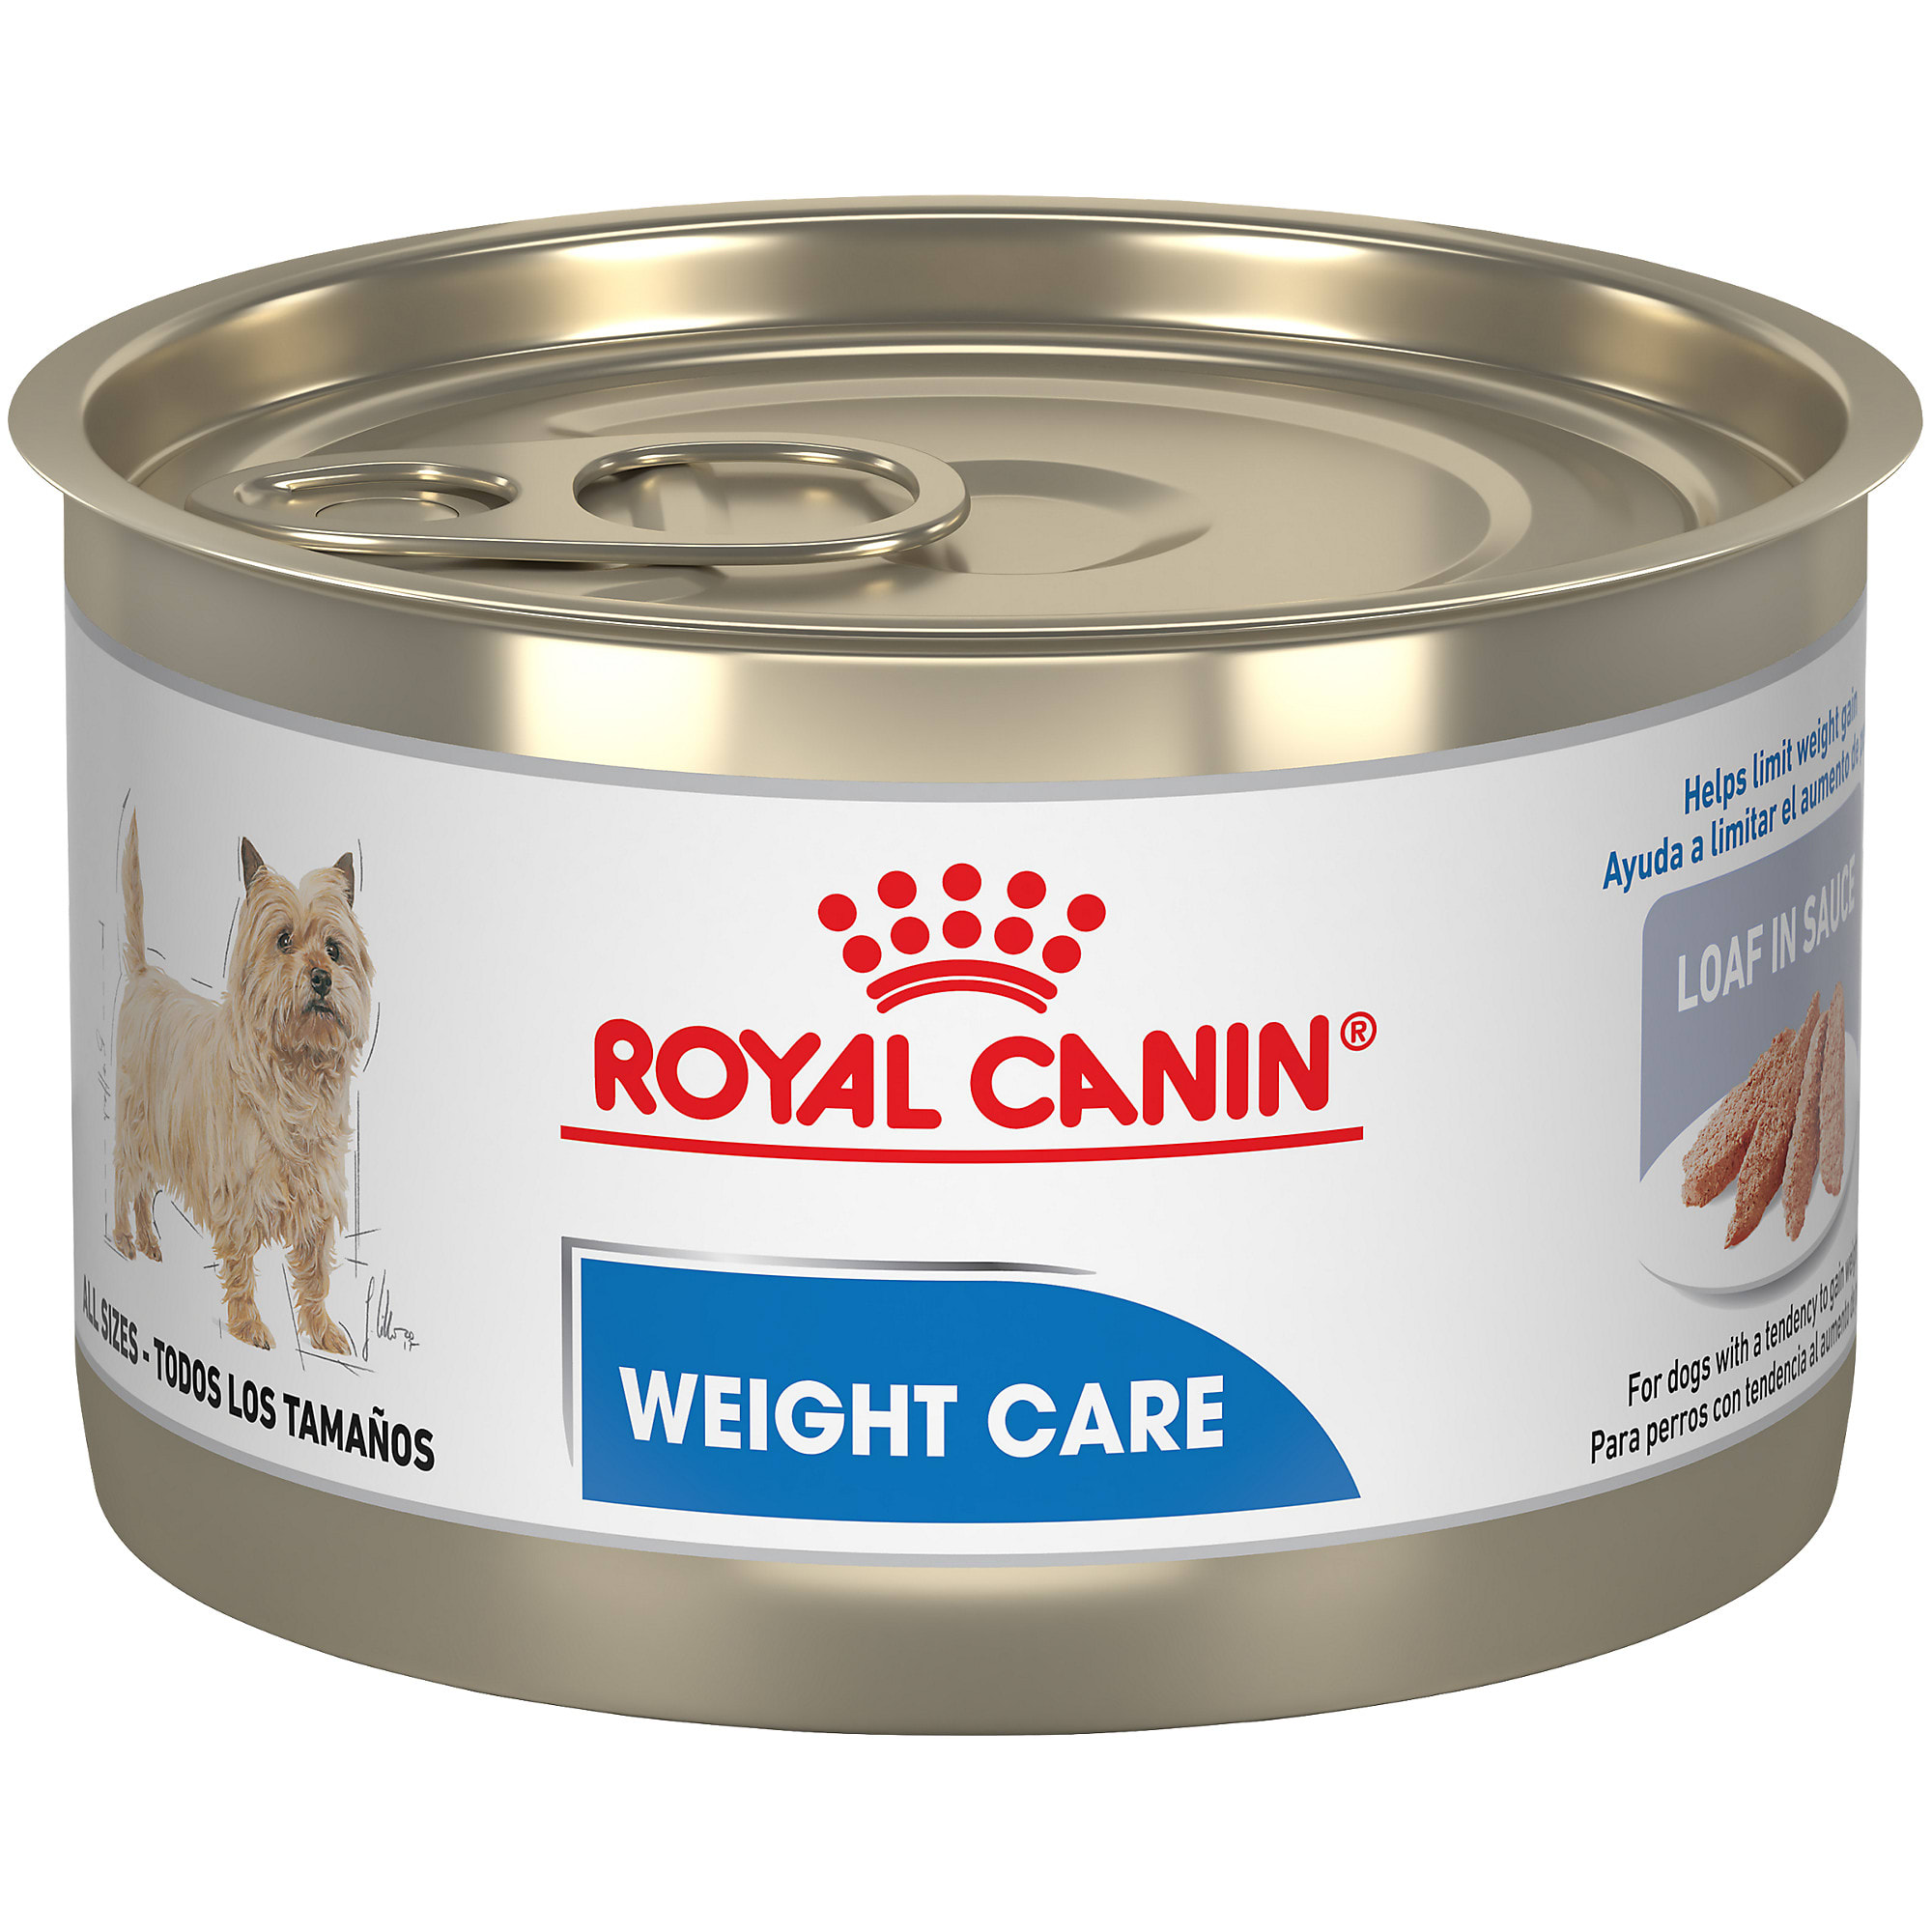 Royal Canin Weight Care Loaf in Sauce Wet Dog Food, 5.2 oz. Petco